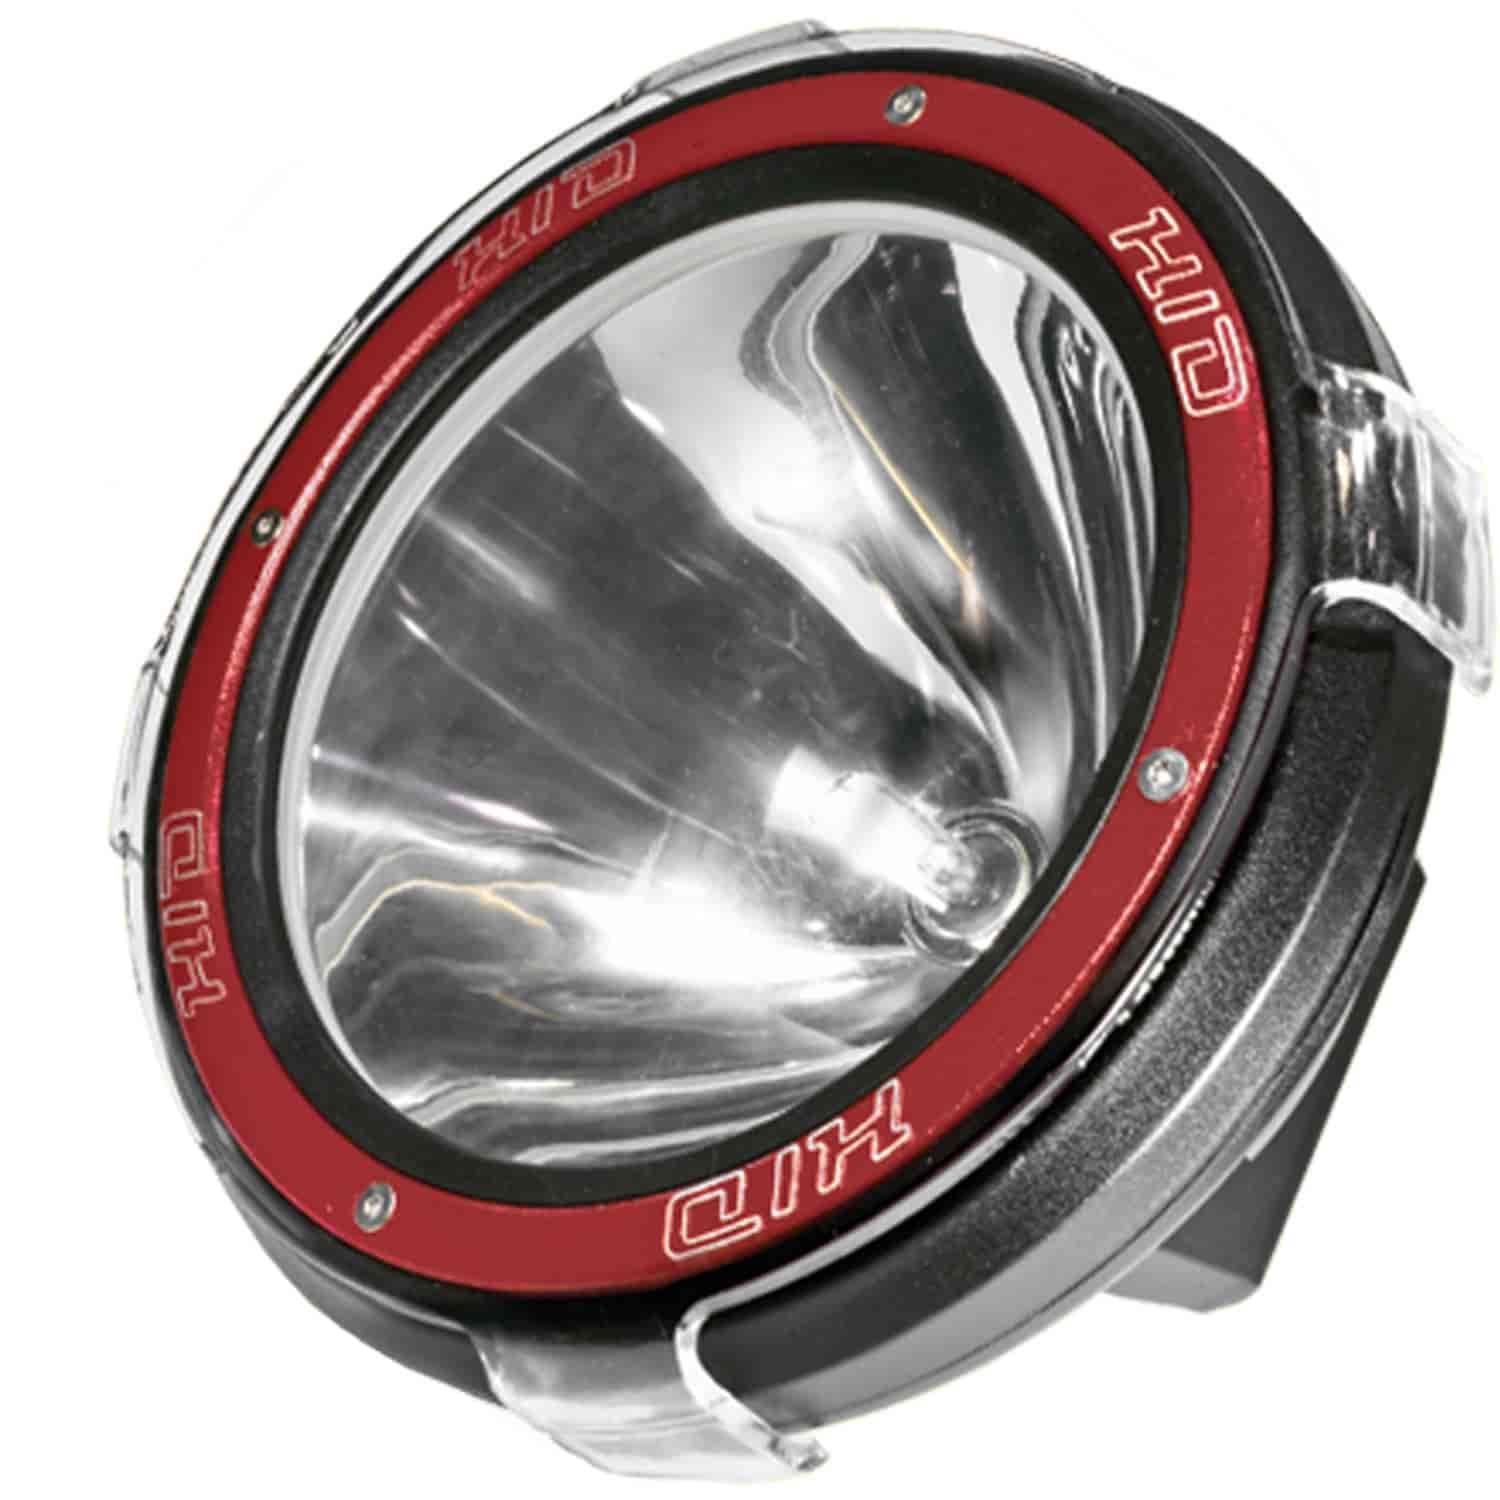 A10 HID Off-Road Light This 7" round light uses a Xenon HID bulb